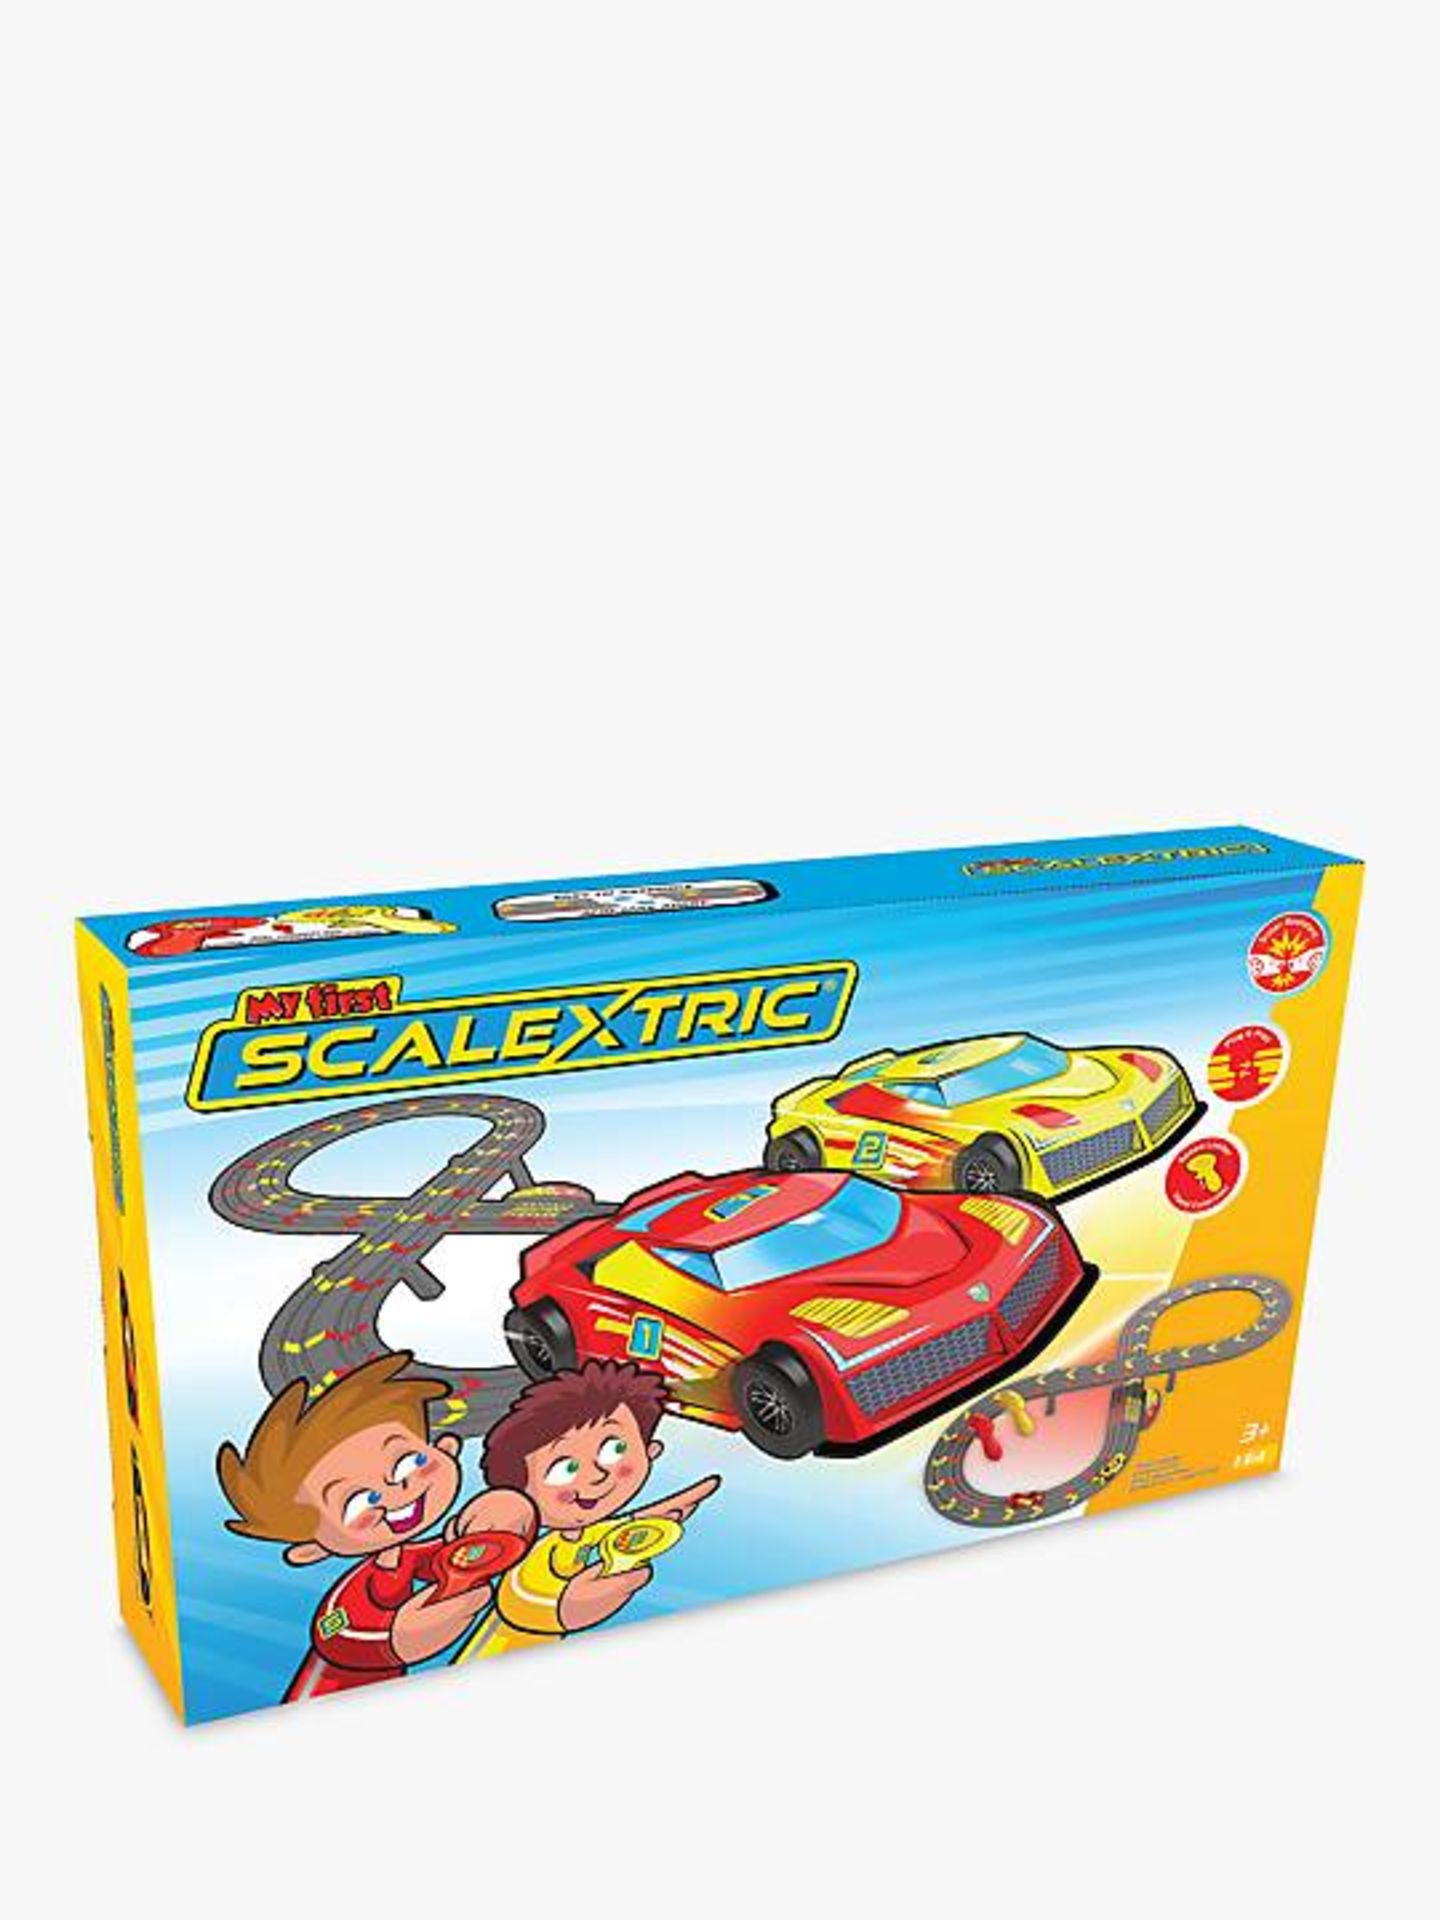 Pallet of Raw Customer Returns - Category - TOYS - P100141731 - Image 13 of 21